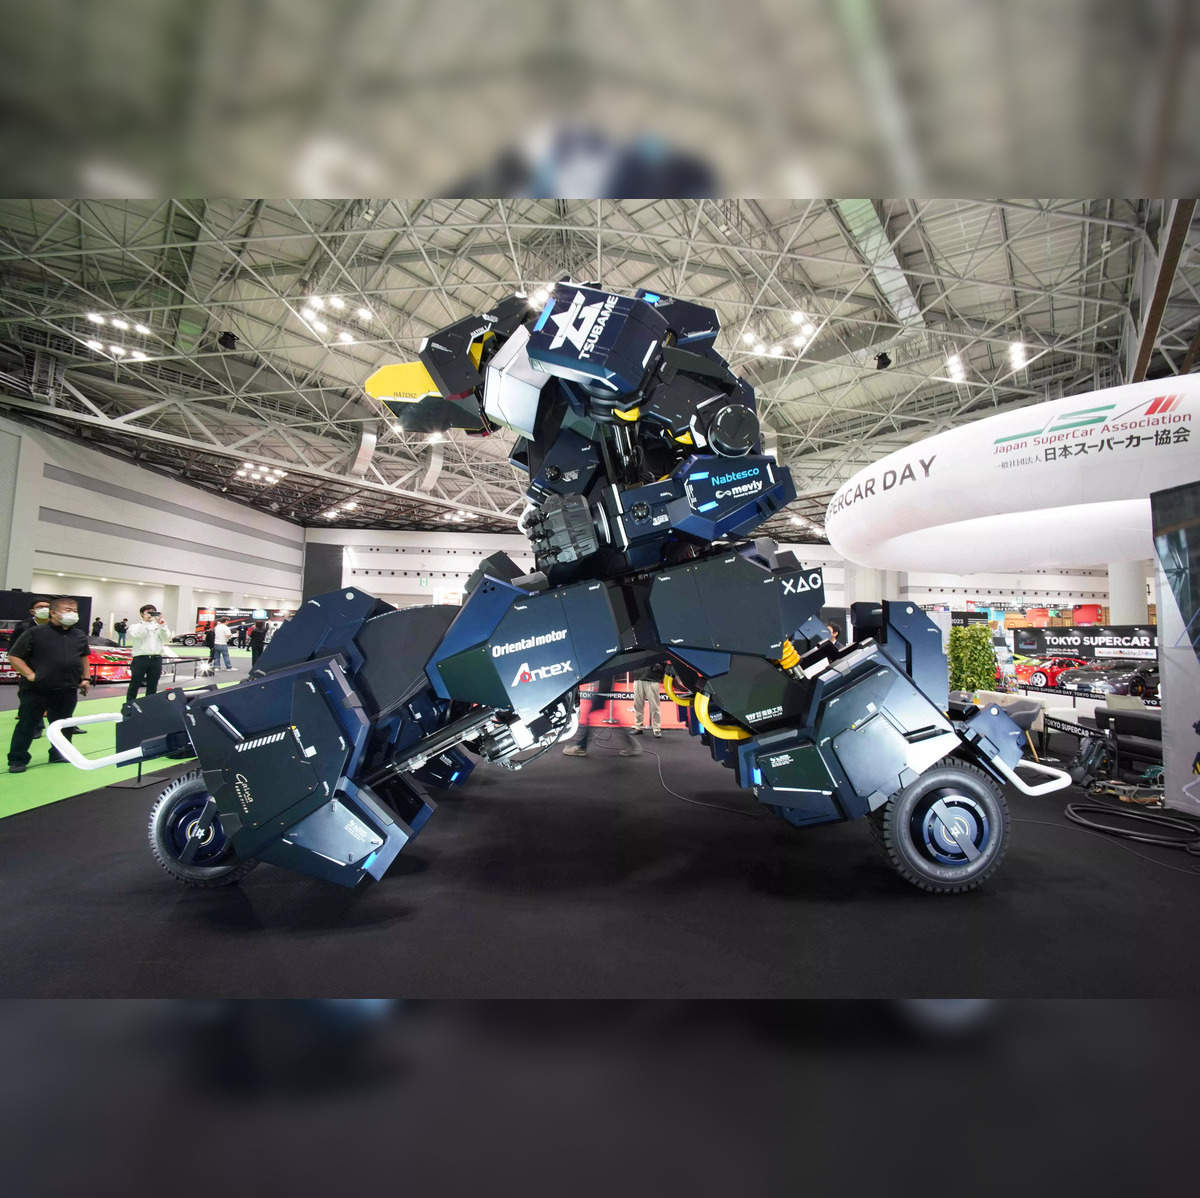 Introducing ARCHAX: The $3 Million Japanese Robot Innovating the